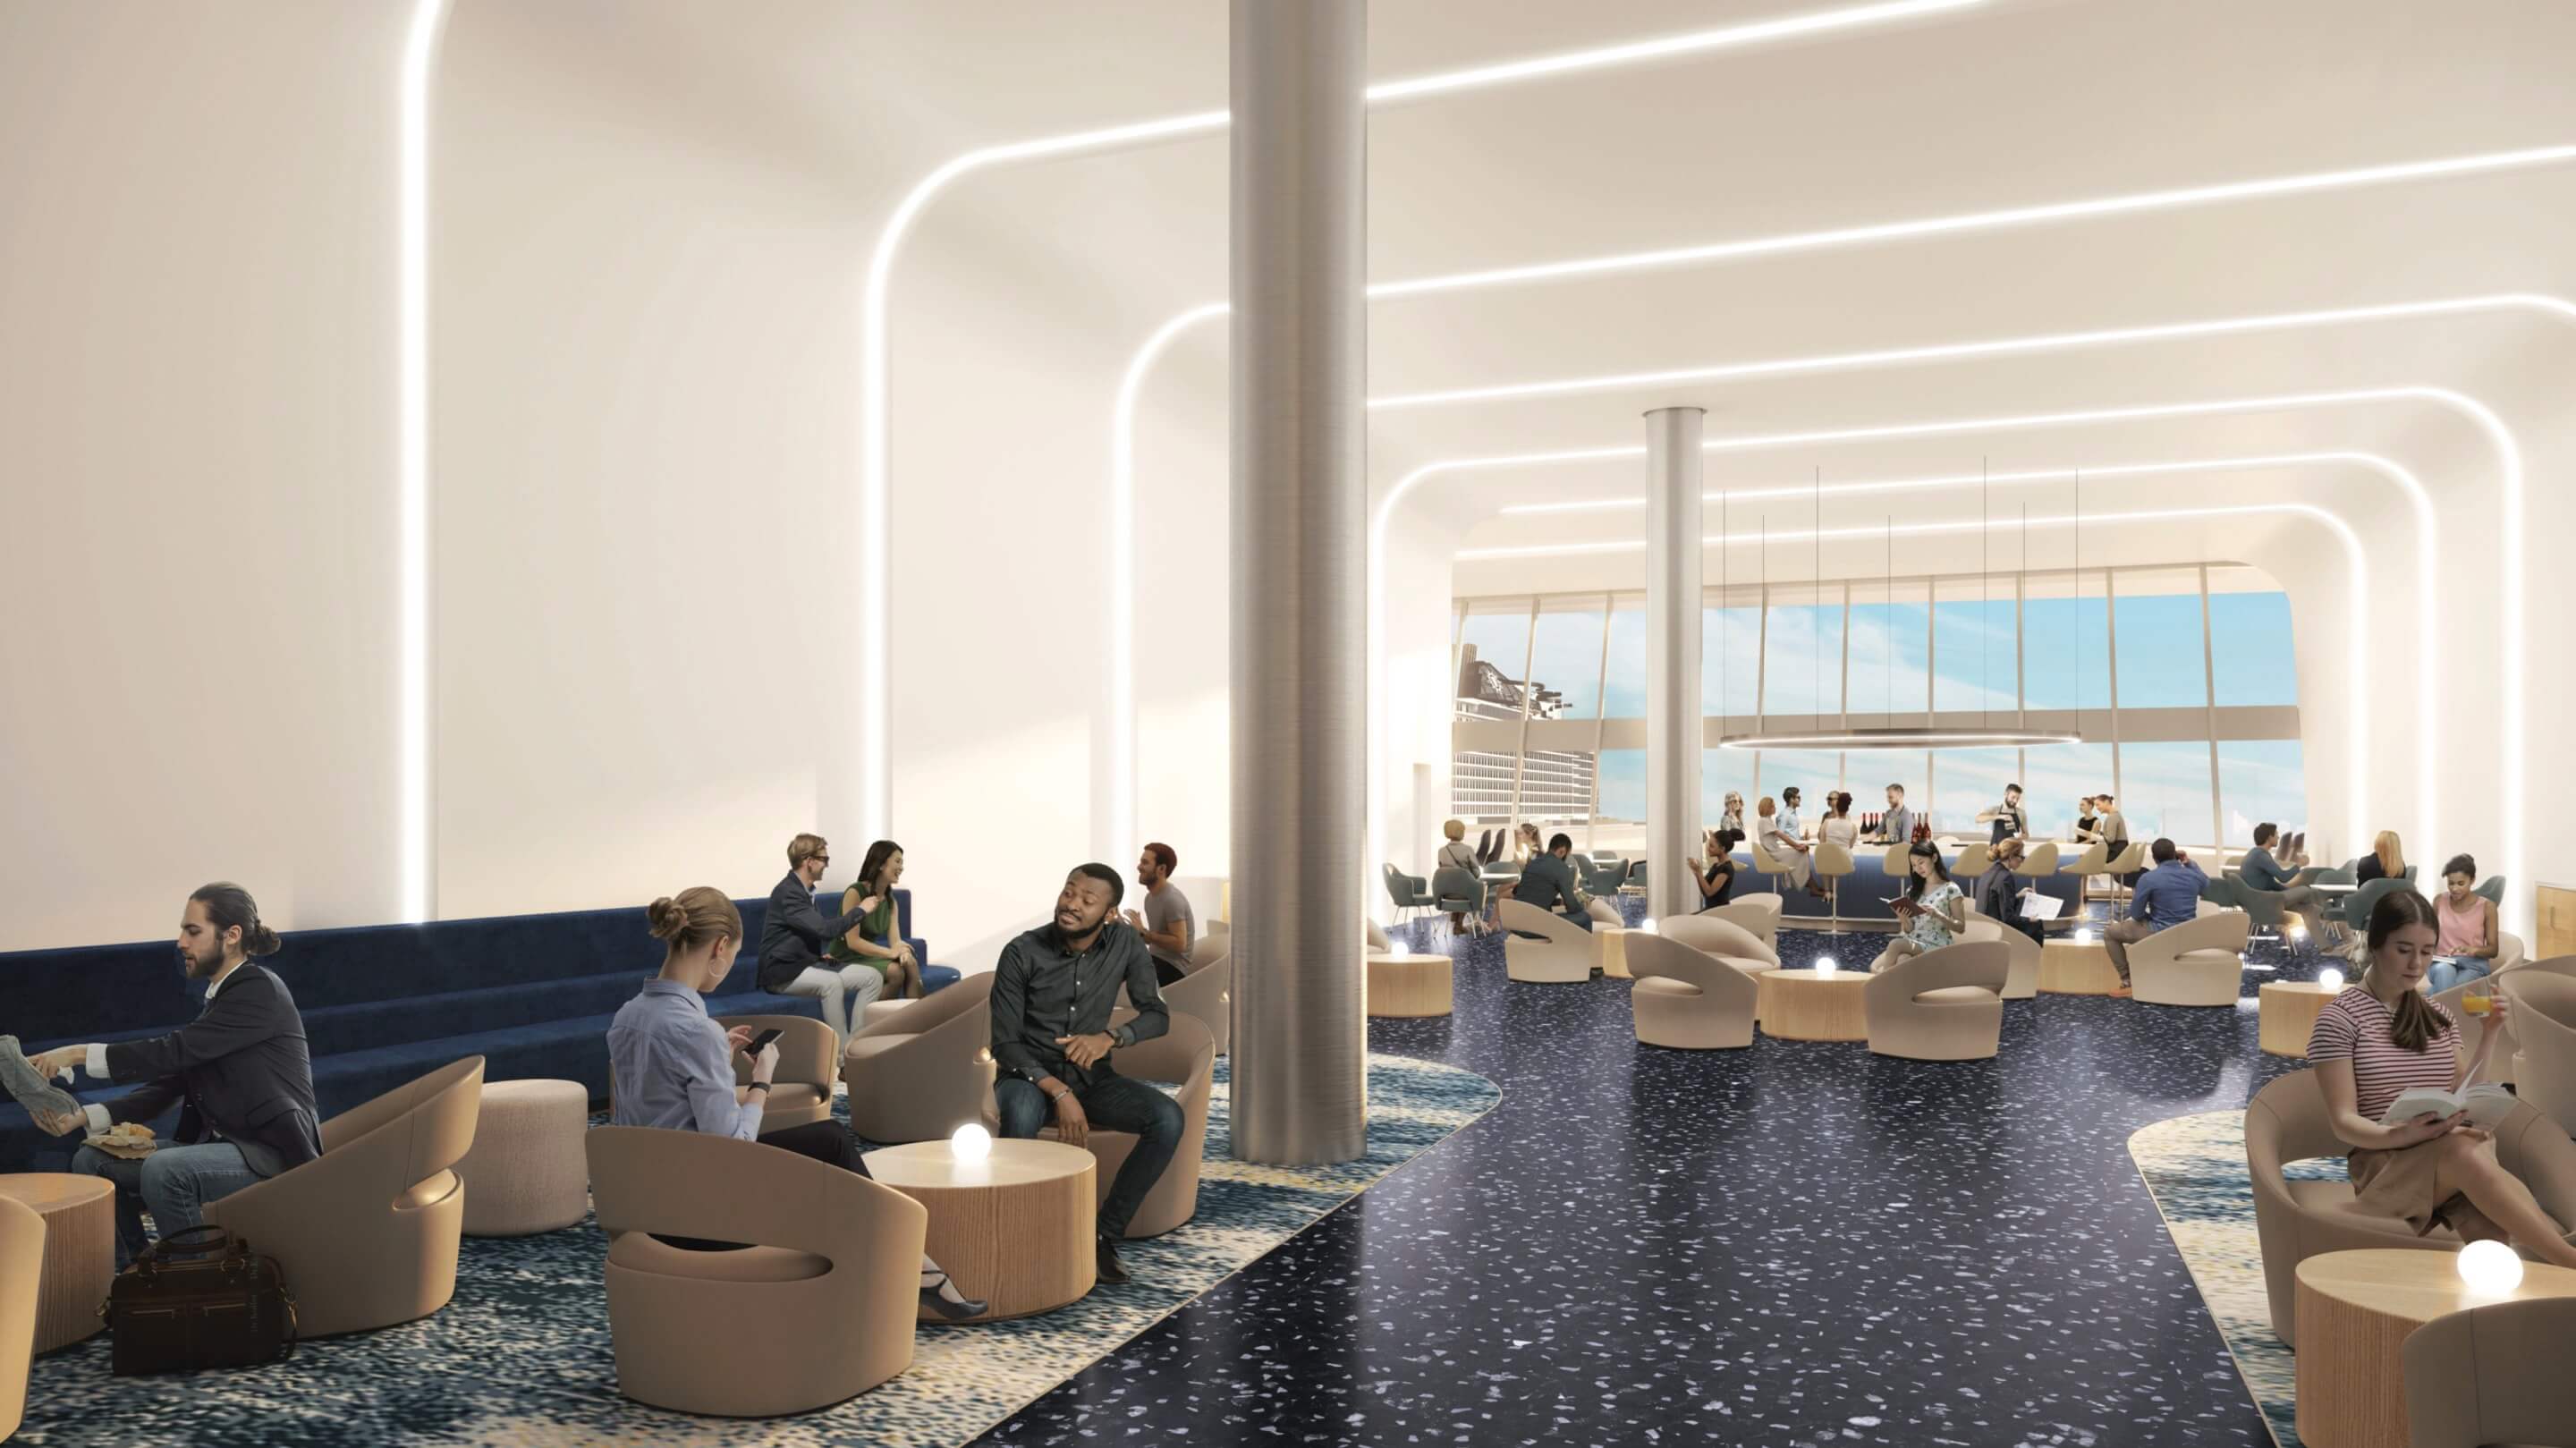 interior rendering of a lounge area in a cruise ship terminal